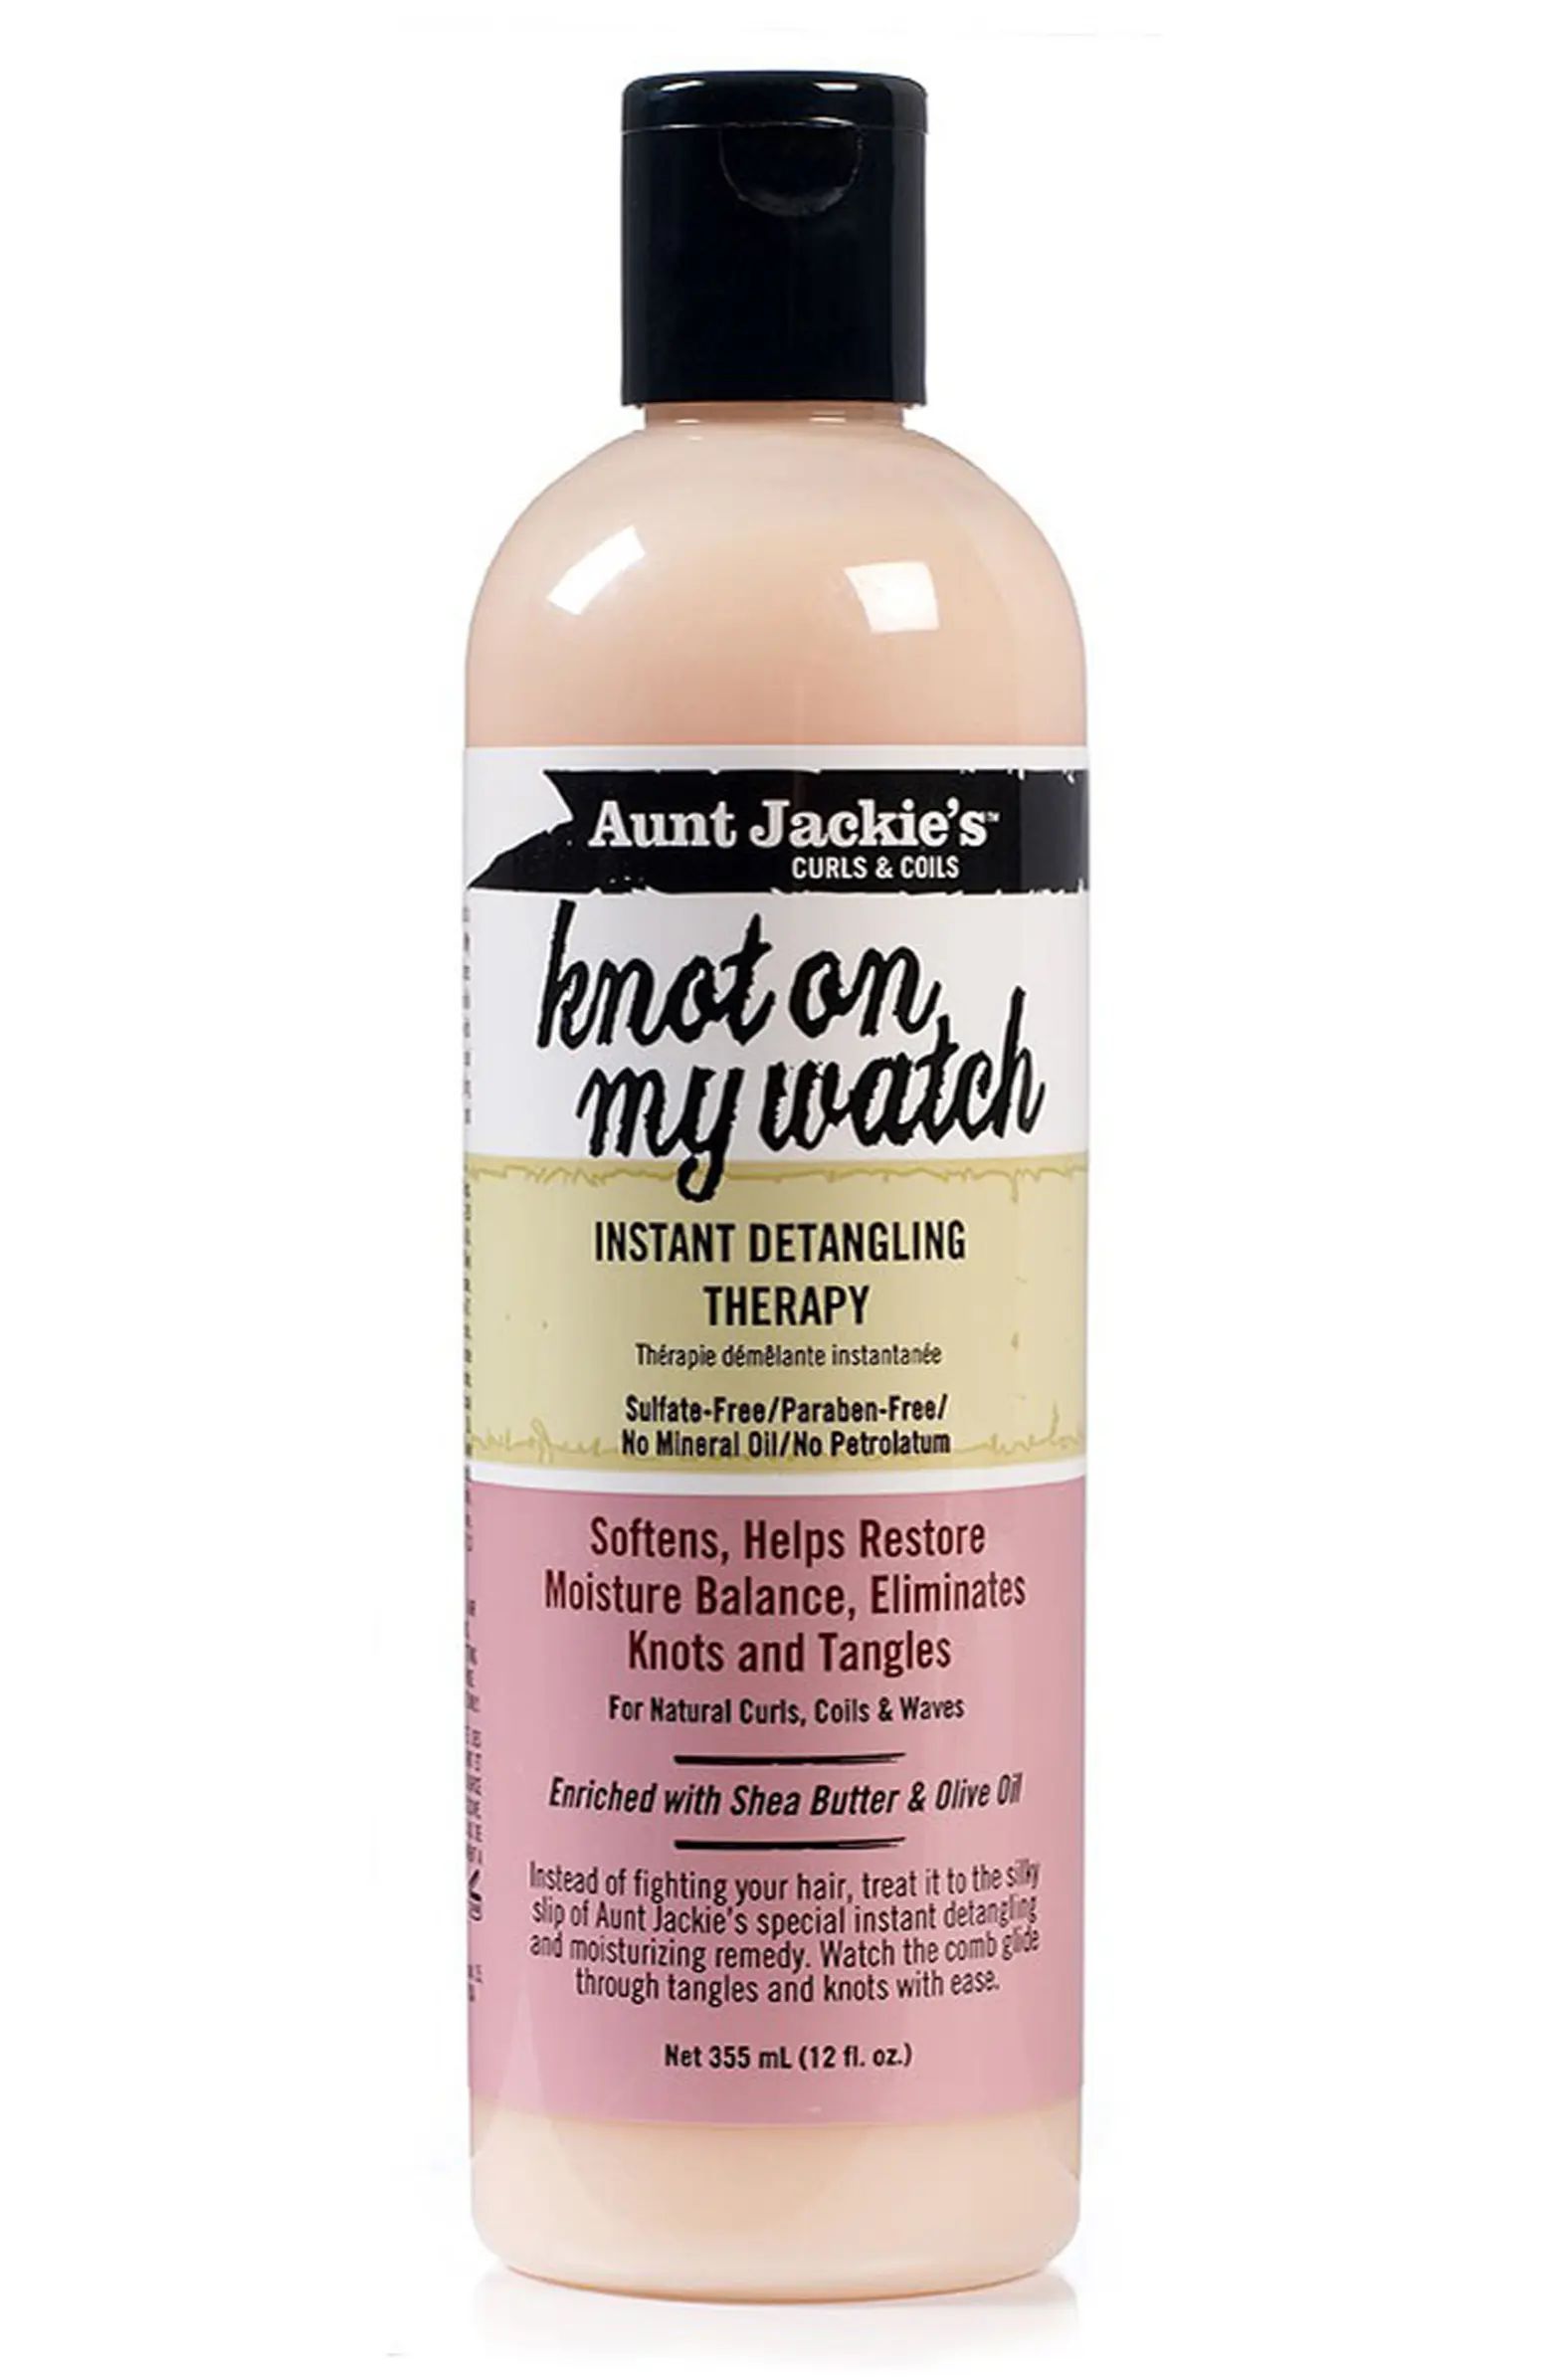 AUNT JACKIE'S Knot On My Watch Instant Detangling Therapy - 12 Fl Oz | Nordstromrack | Nordstrom Rack